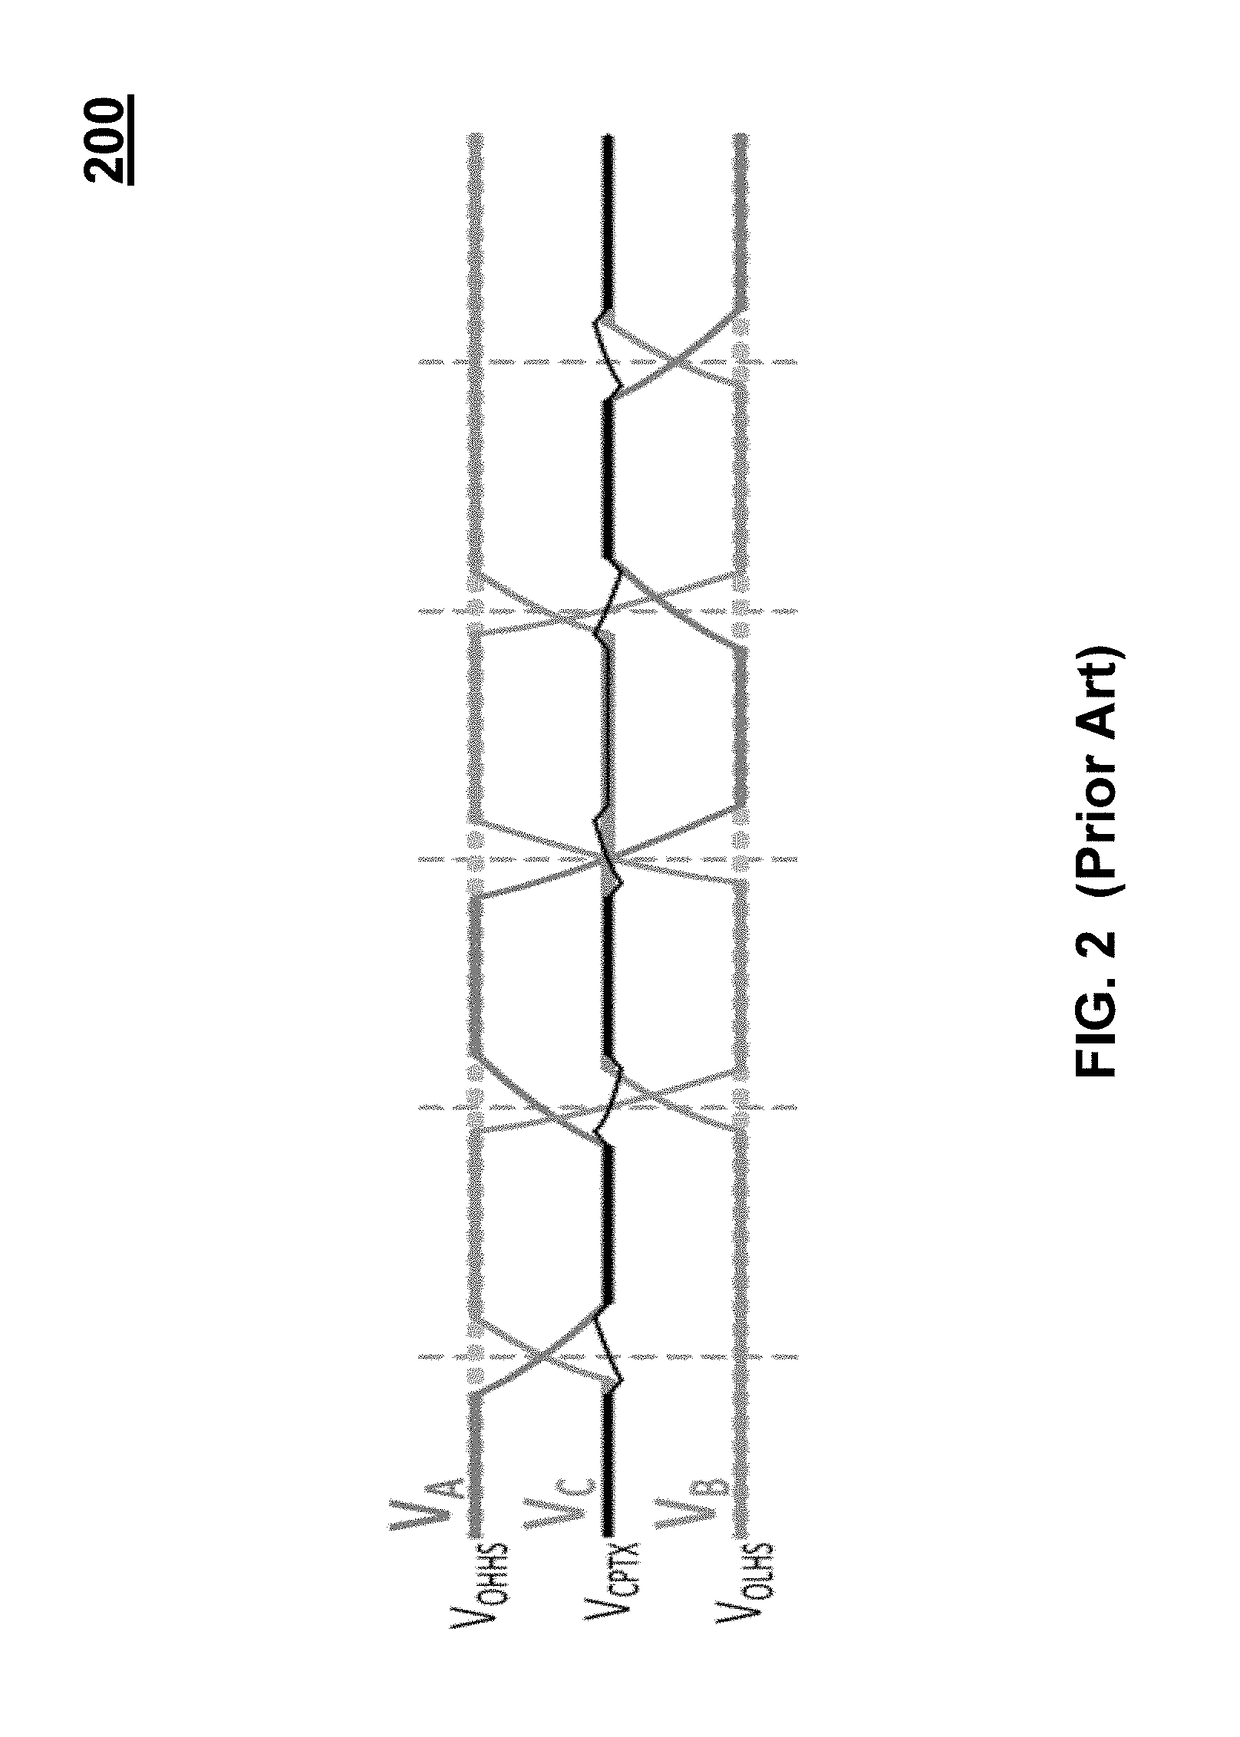 Repetitive IO Structure in a Phy for Supporting C-Phy Compatible Standard and/or D-Phy Compatible Standard